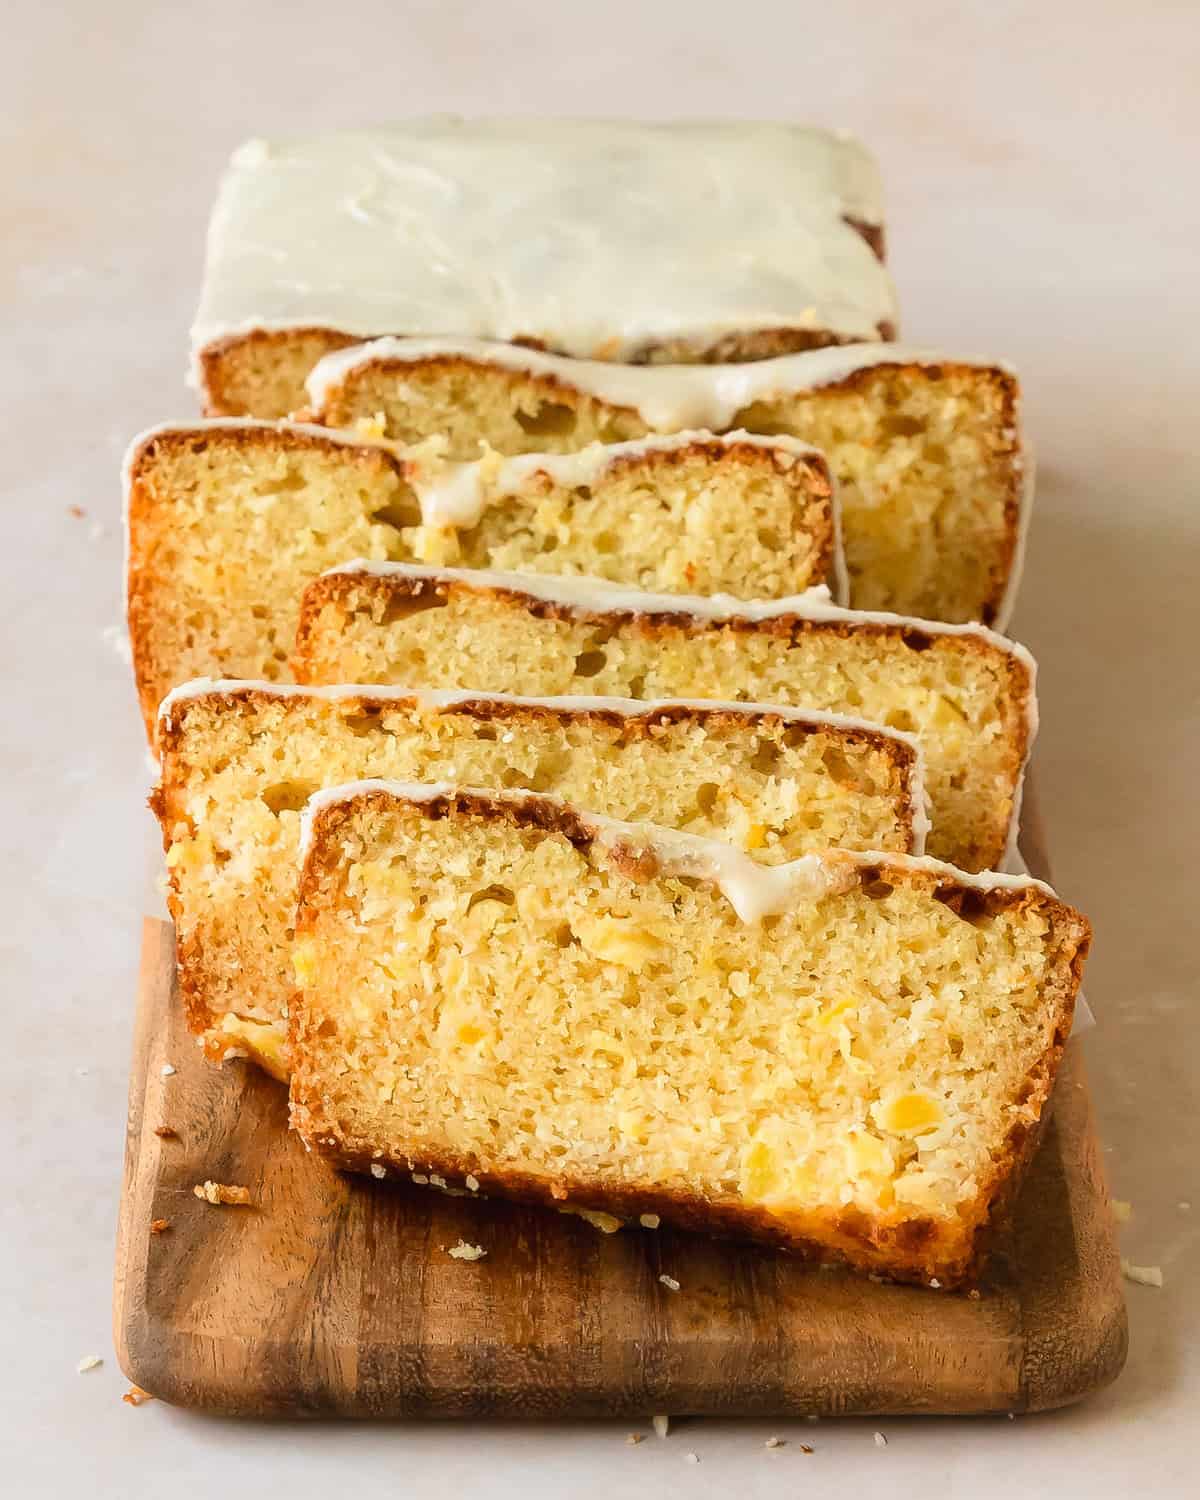 Pineapple bread is a soft, moist and buttery pineapple quick bread filled with crushed pineapple. This easy to make pineapple loaf cake is topped with a sweet pineapple glaze for even more fresh tropical flavor. 